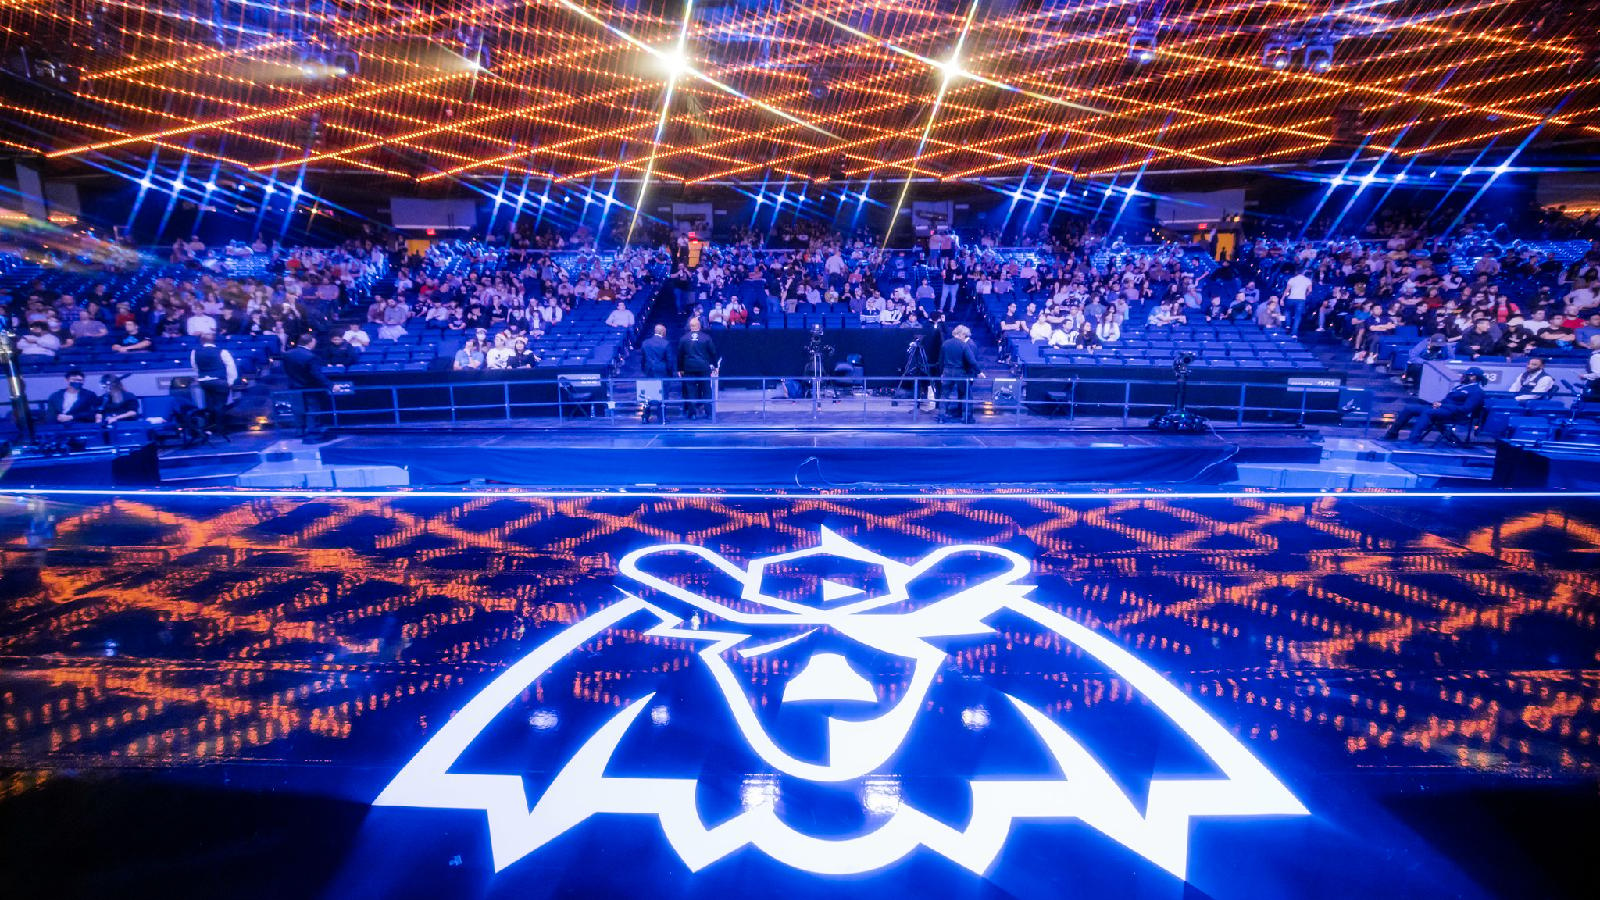 League of Legends Worlds winner plays on this stage